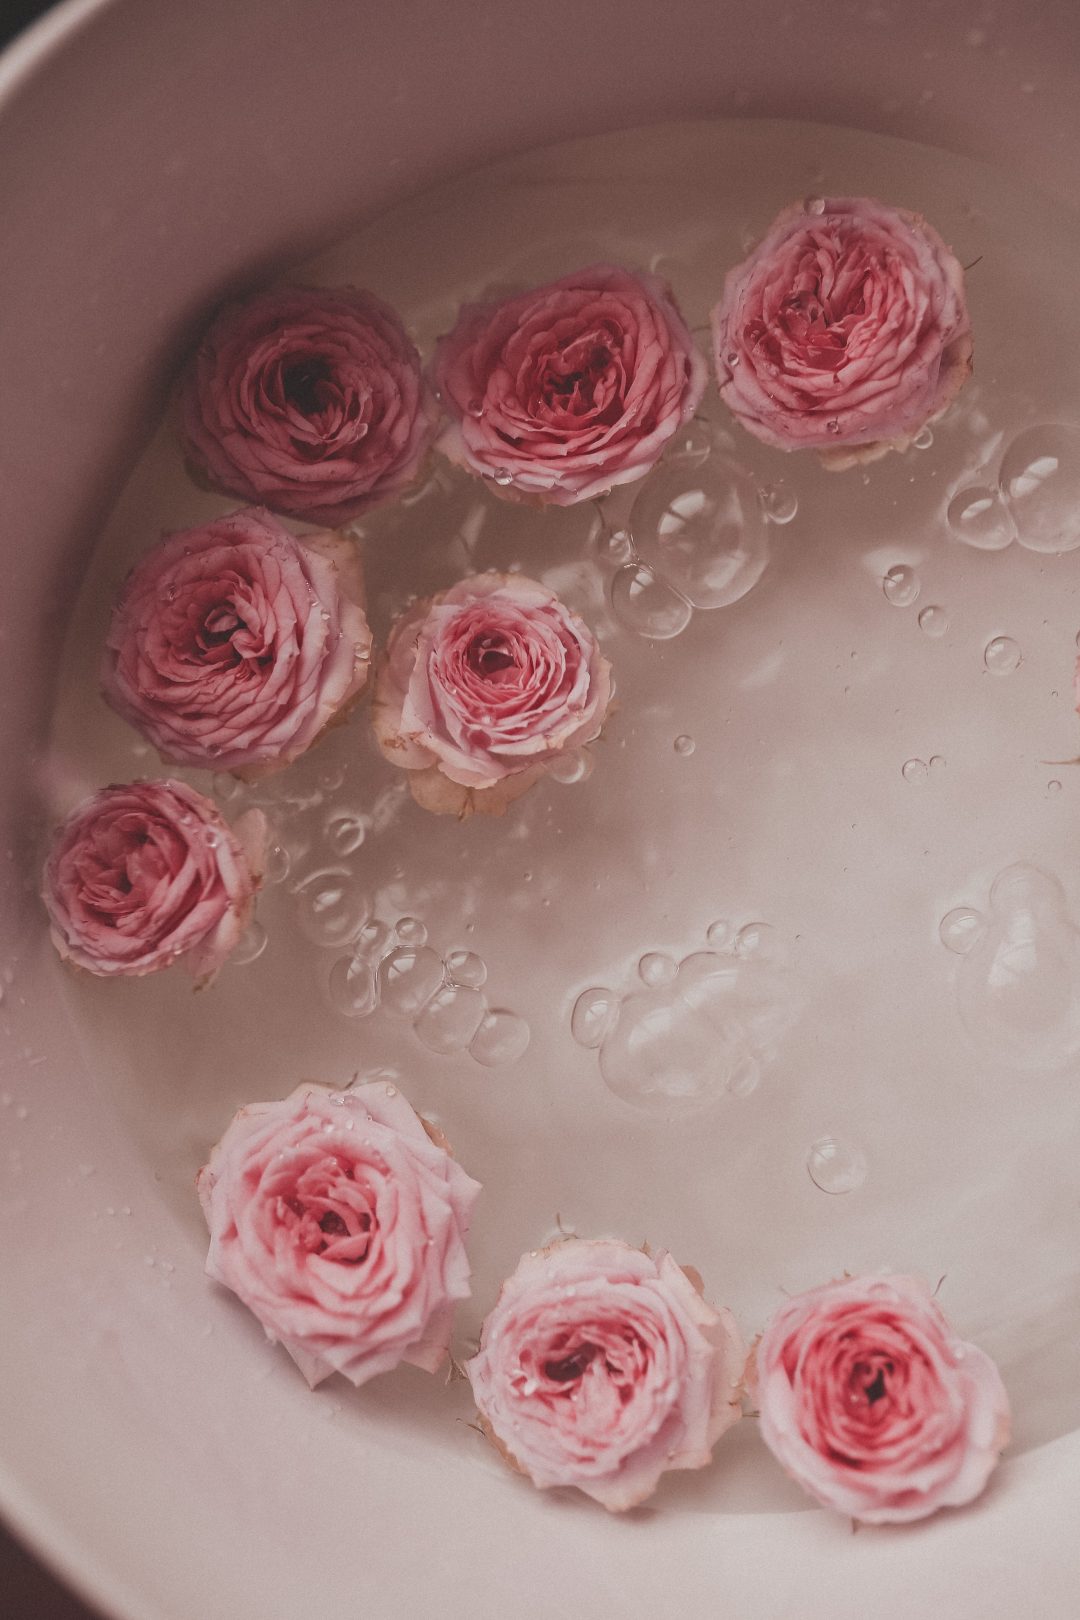 A bowl of water with pink roses in it - Roses